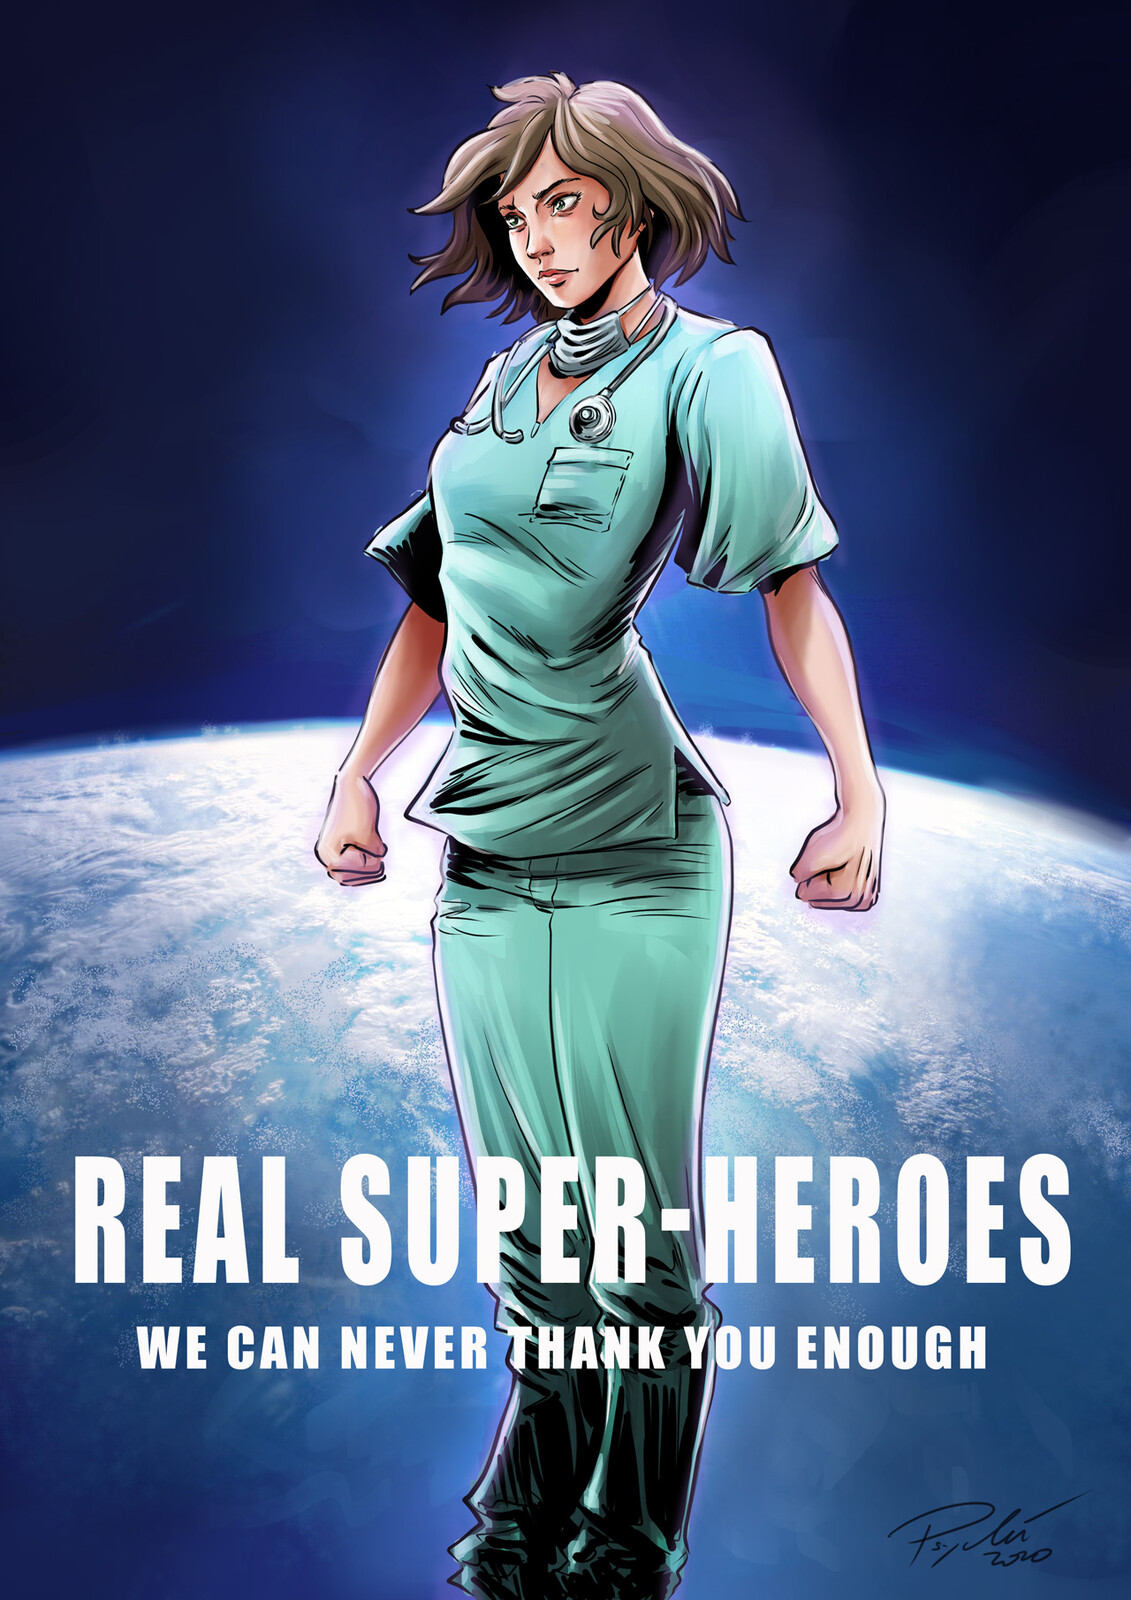 My Tribute to Healthcare Workers in HD, free, licensed CC 